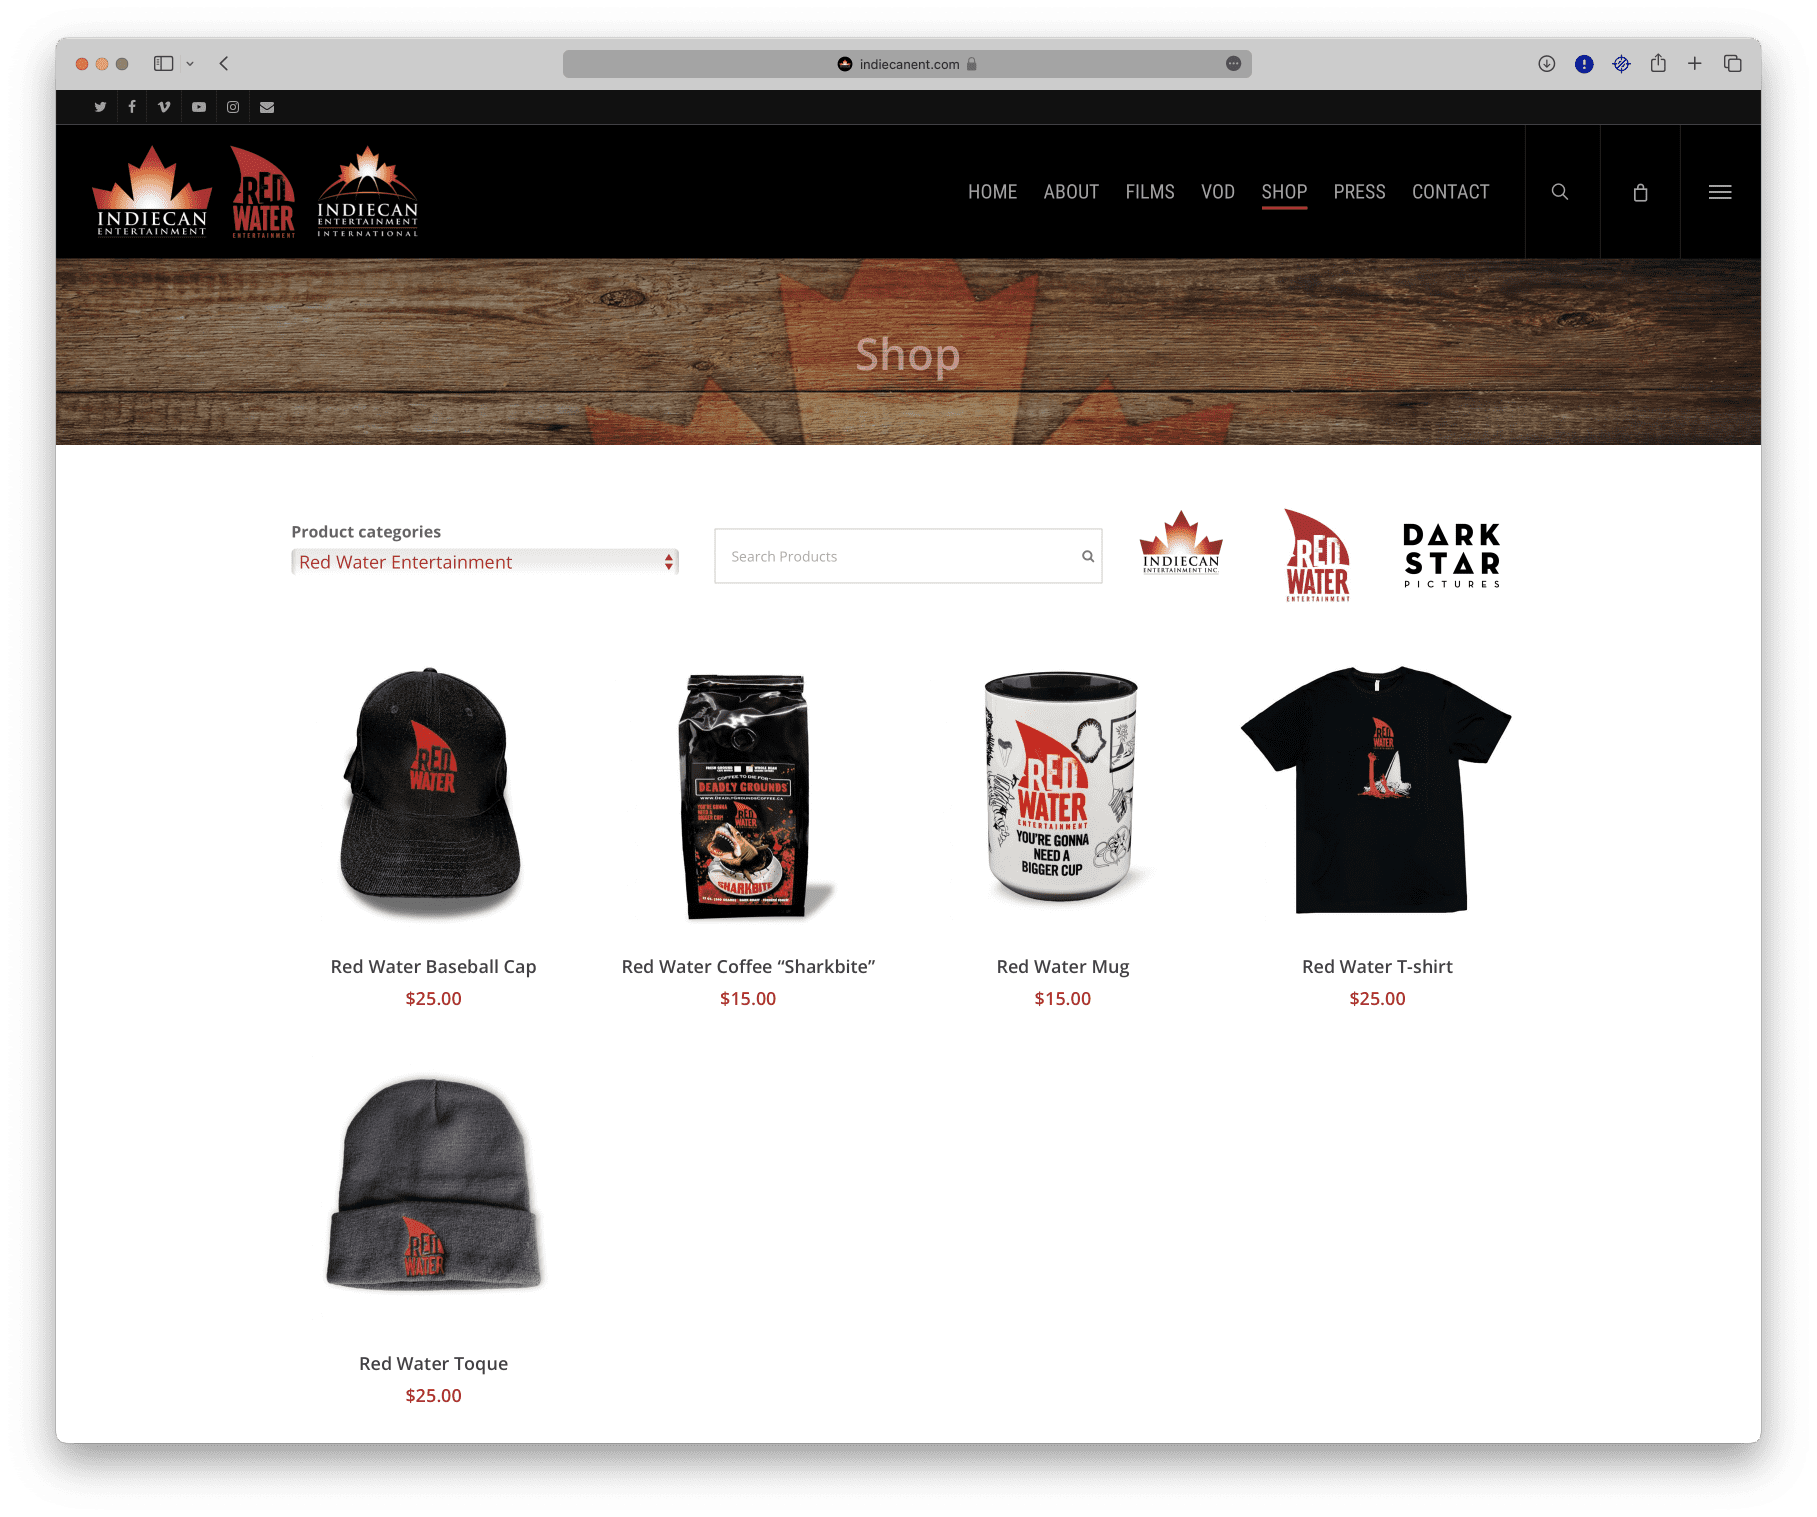 A screen shot of a website with a hat and t-shirts.